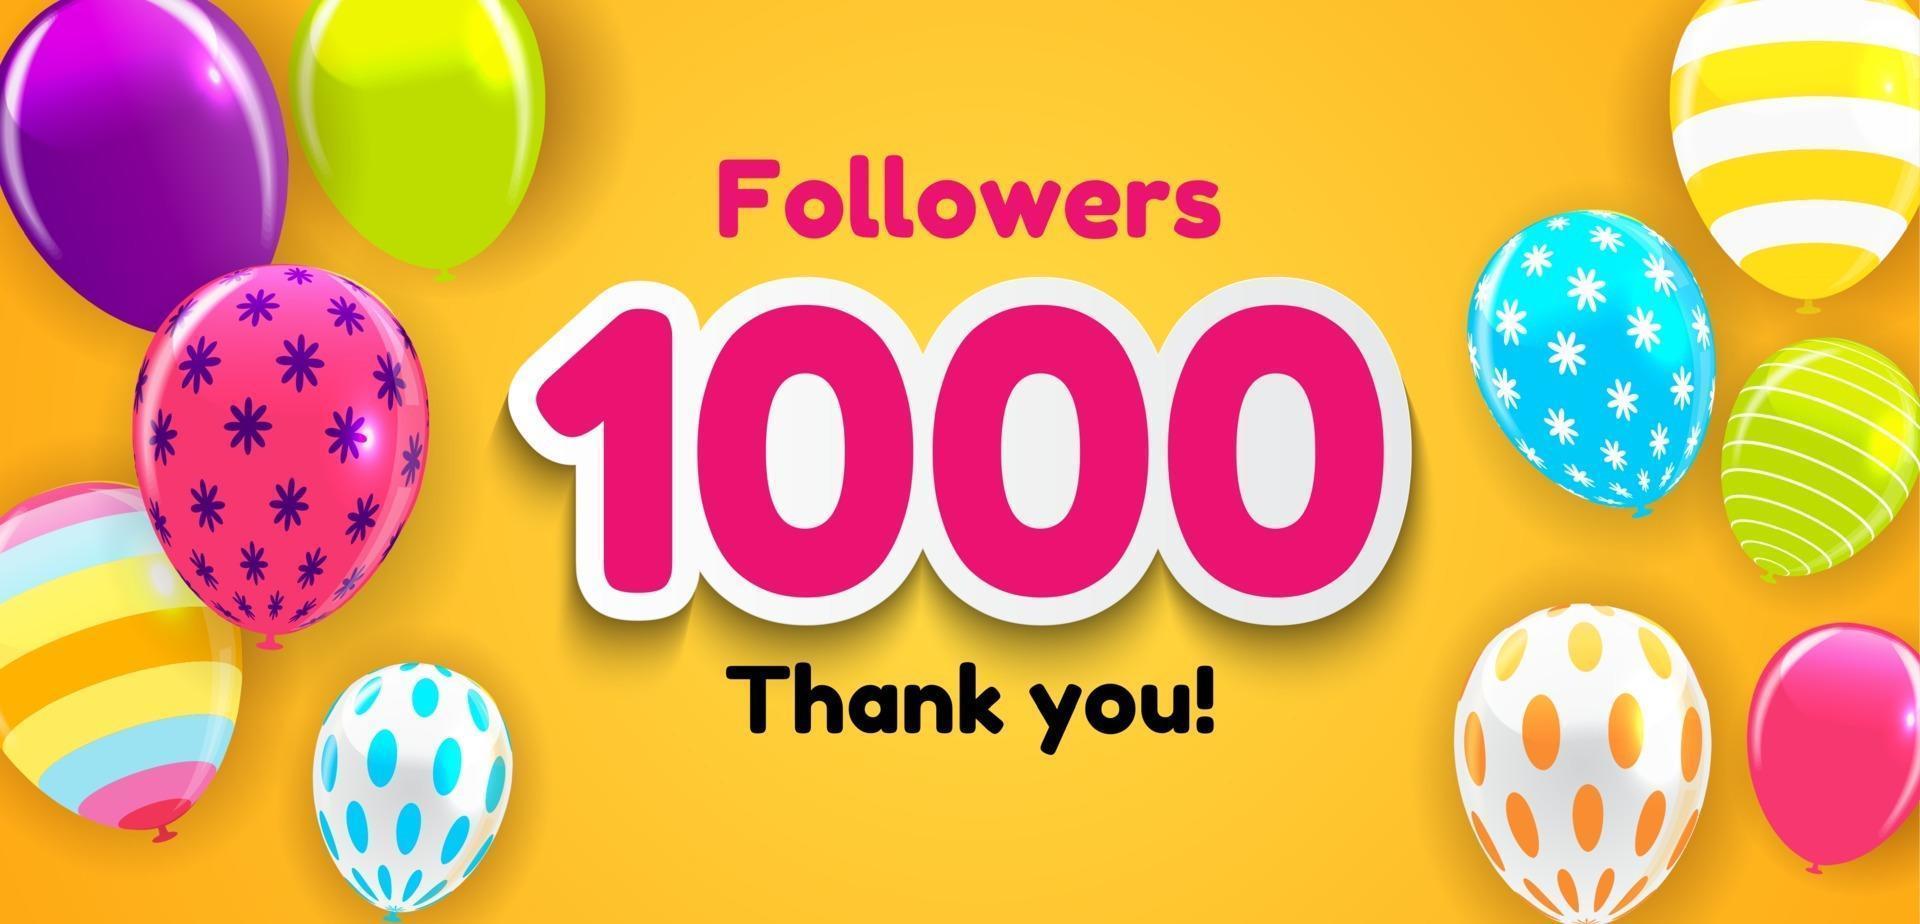 1000 Followers, Thank you Background for Social Network friends vector